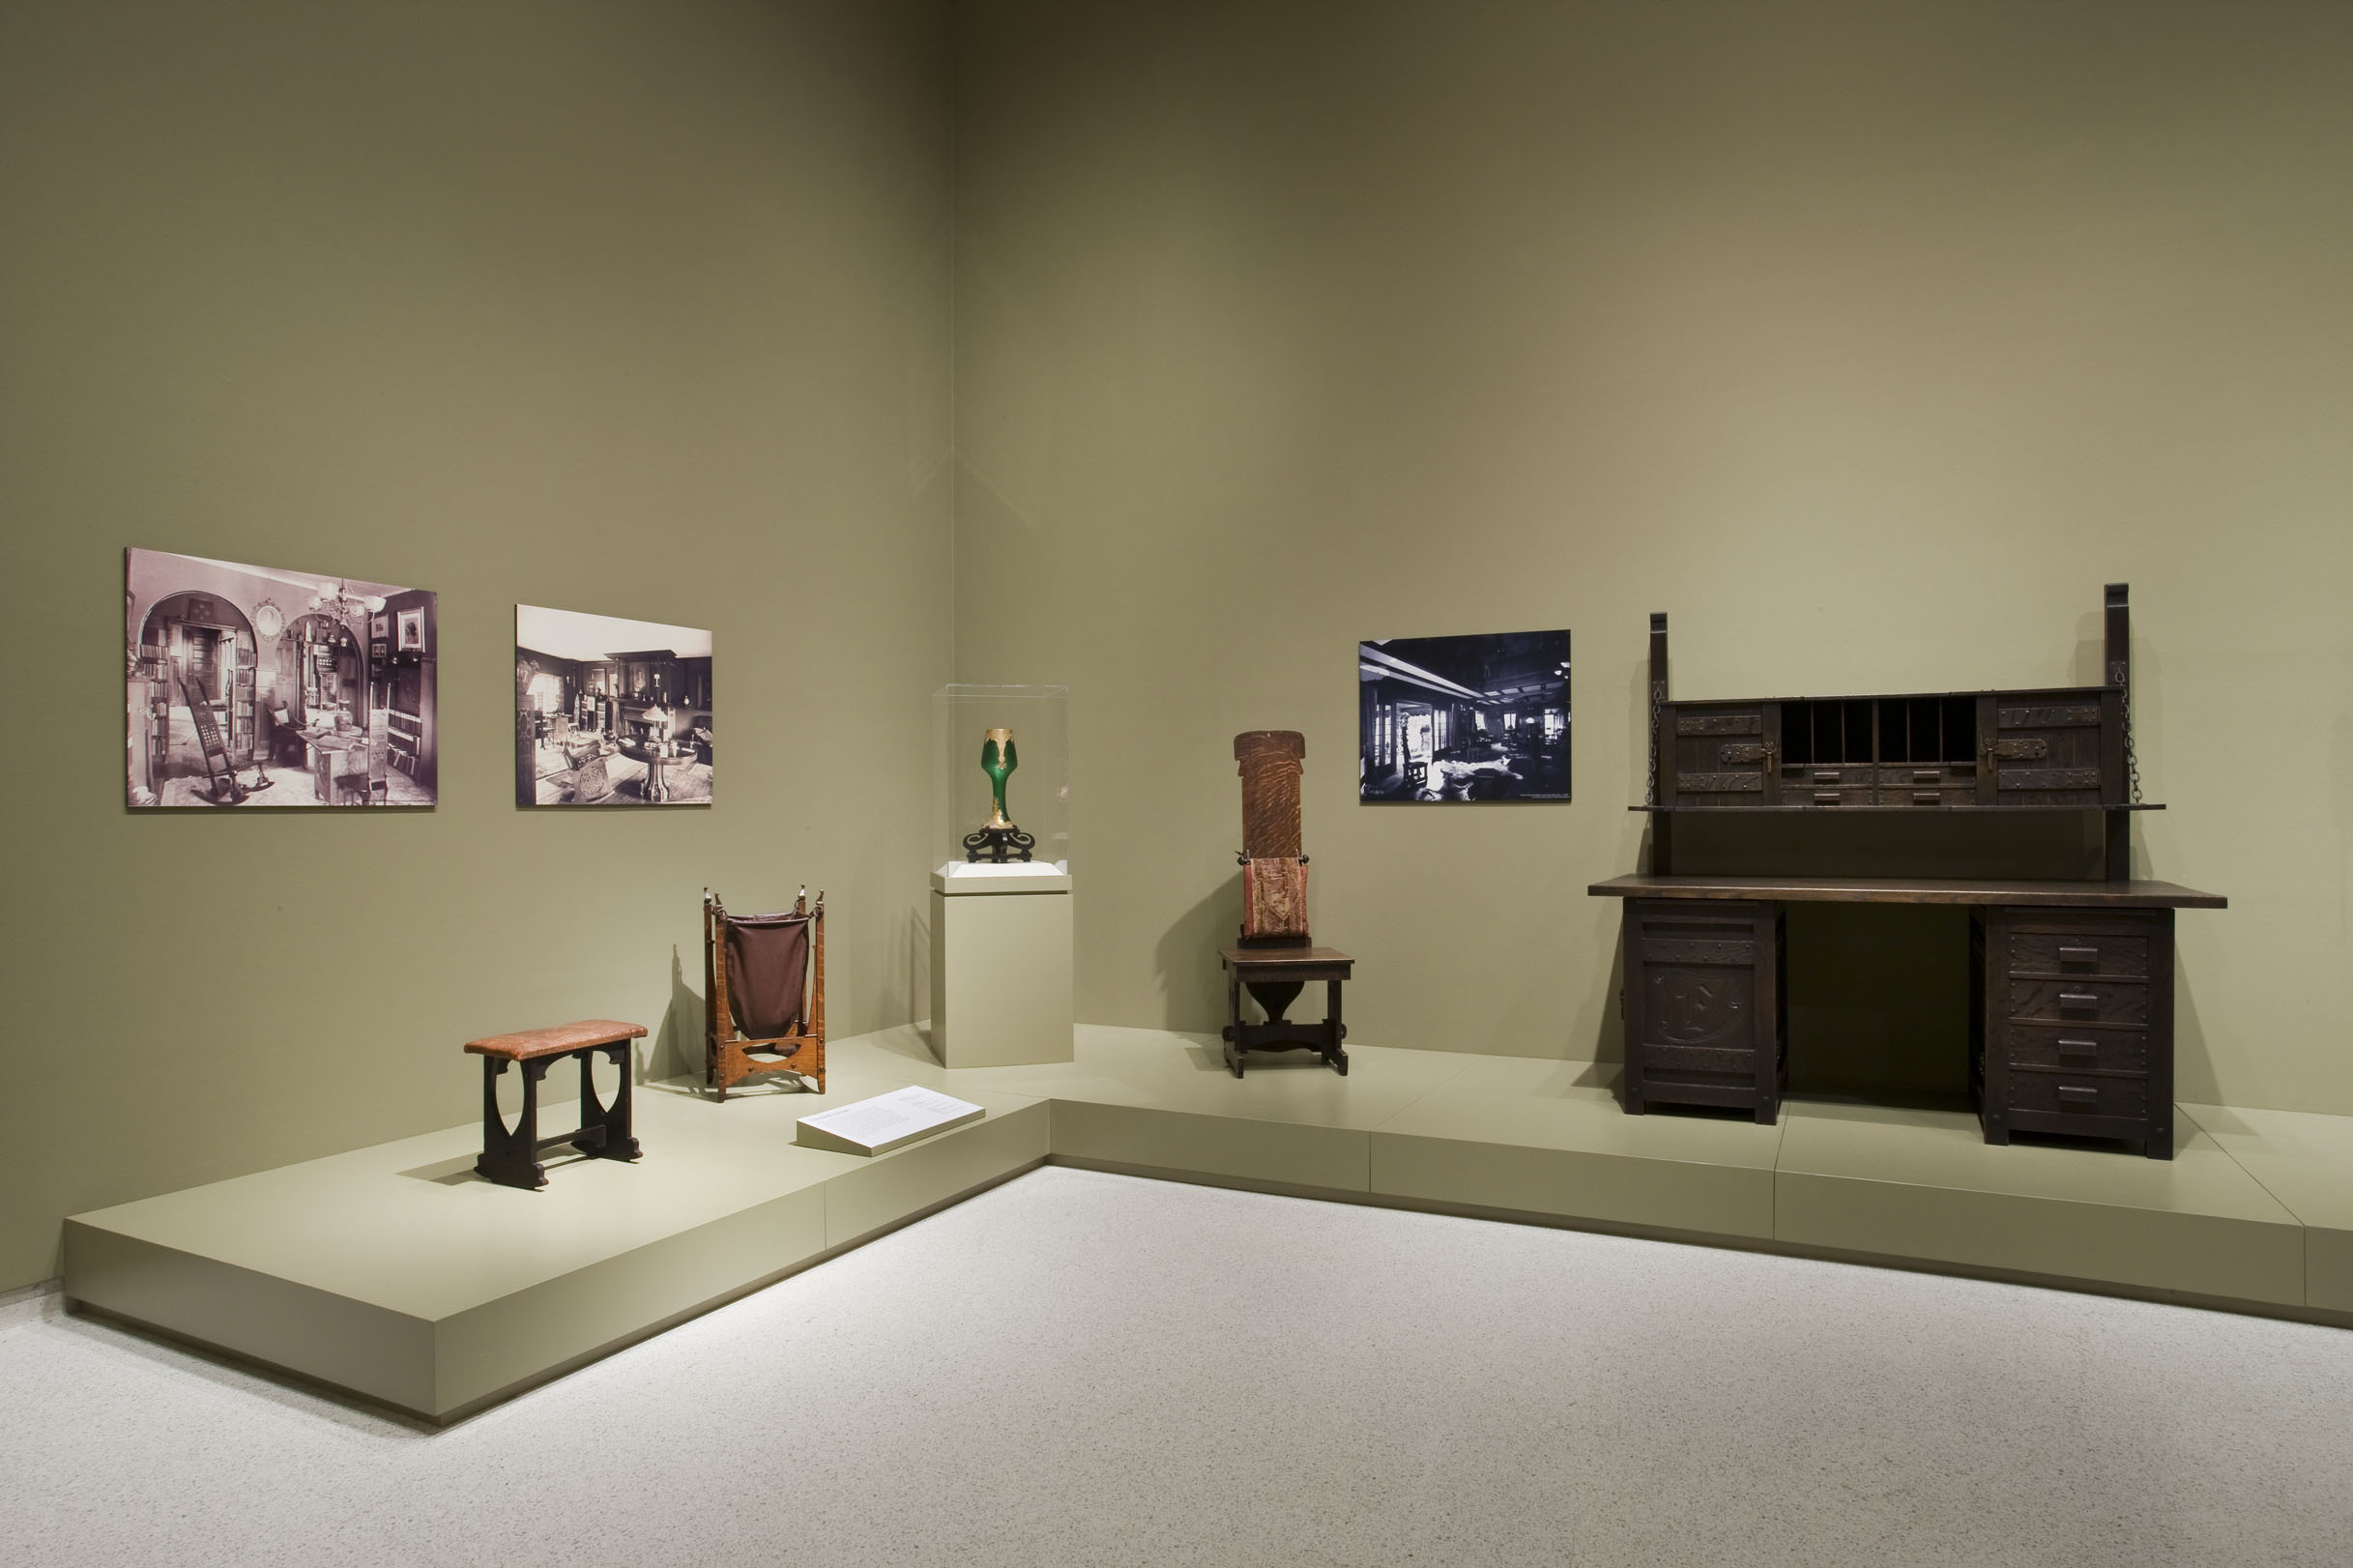 Installation view of The Artistic Furniture of Charles Rohlfs